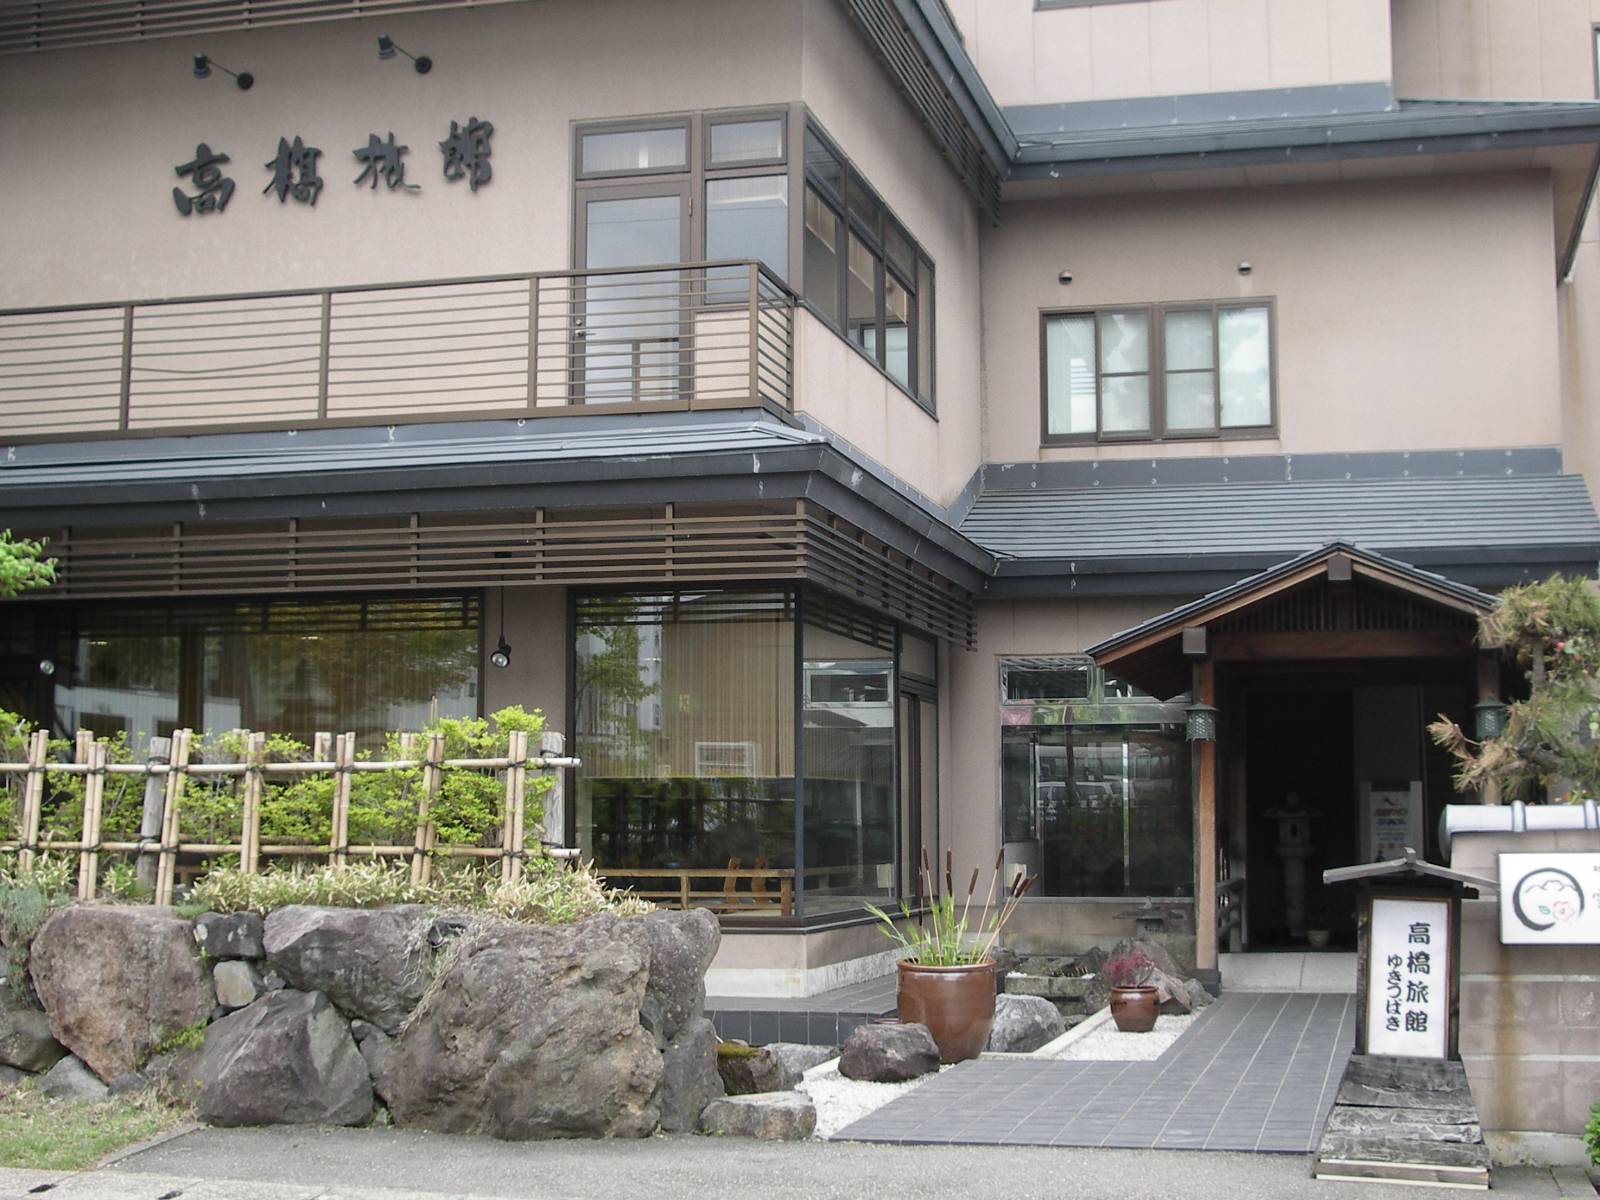 Outside view of the hotel